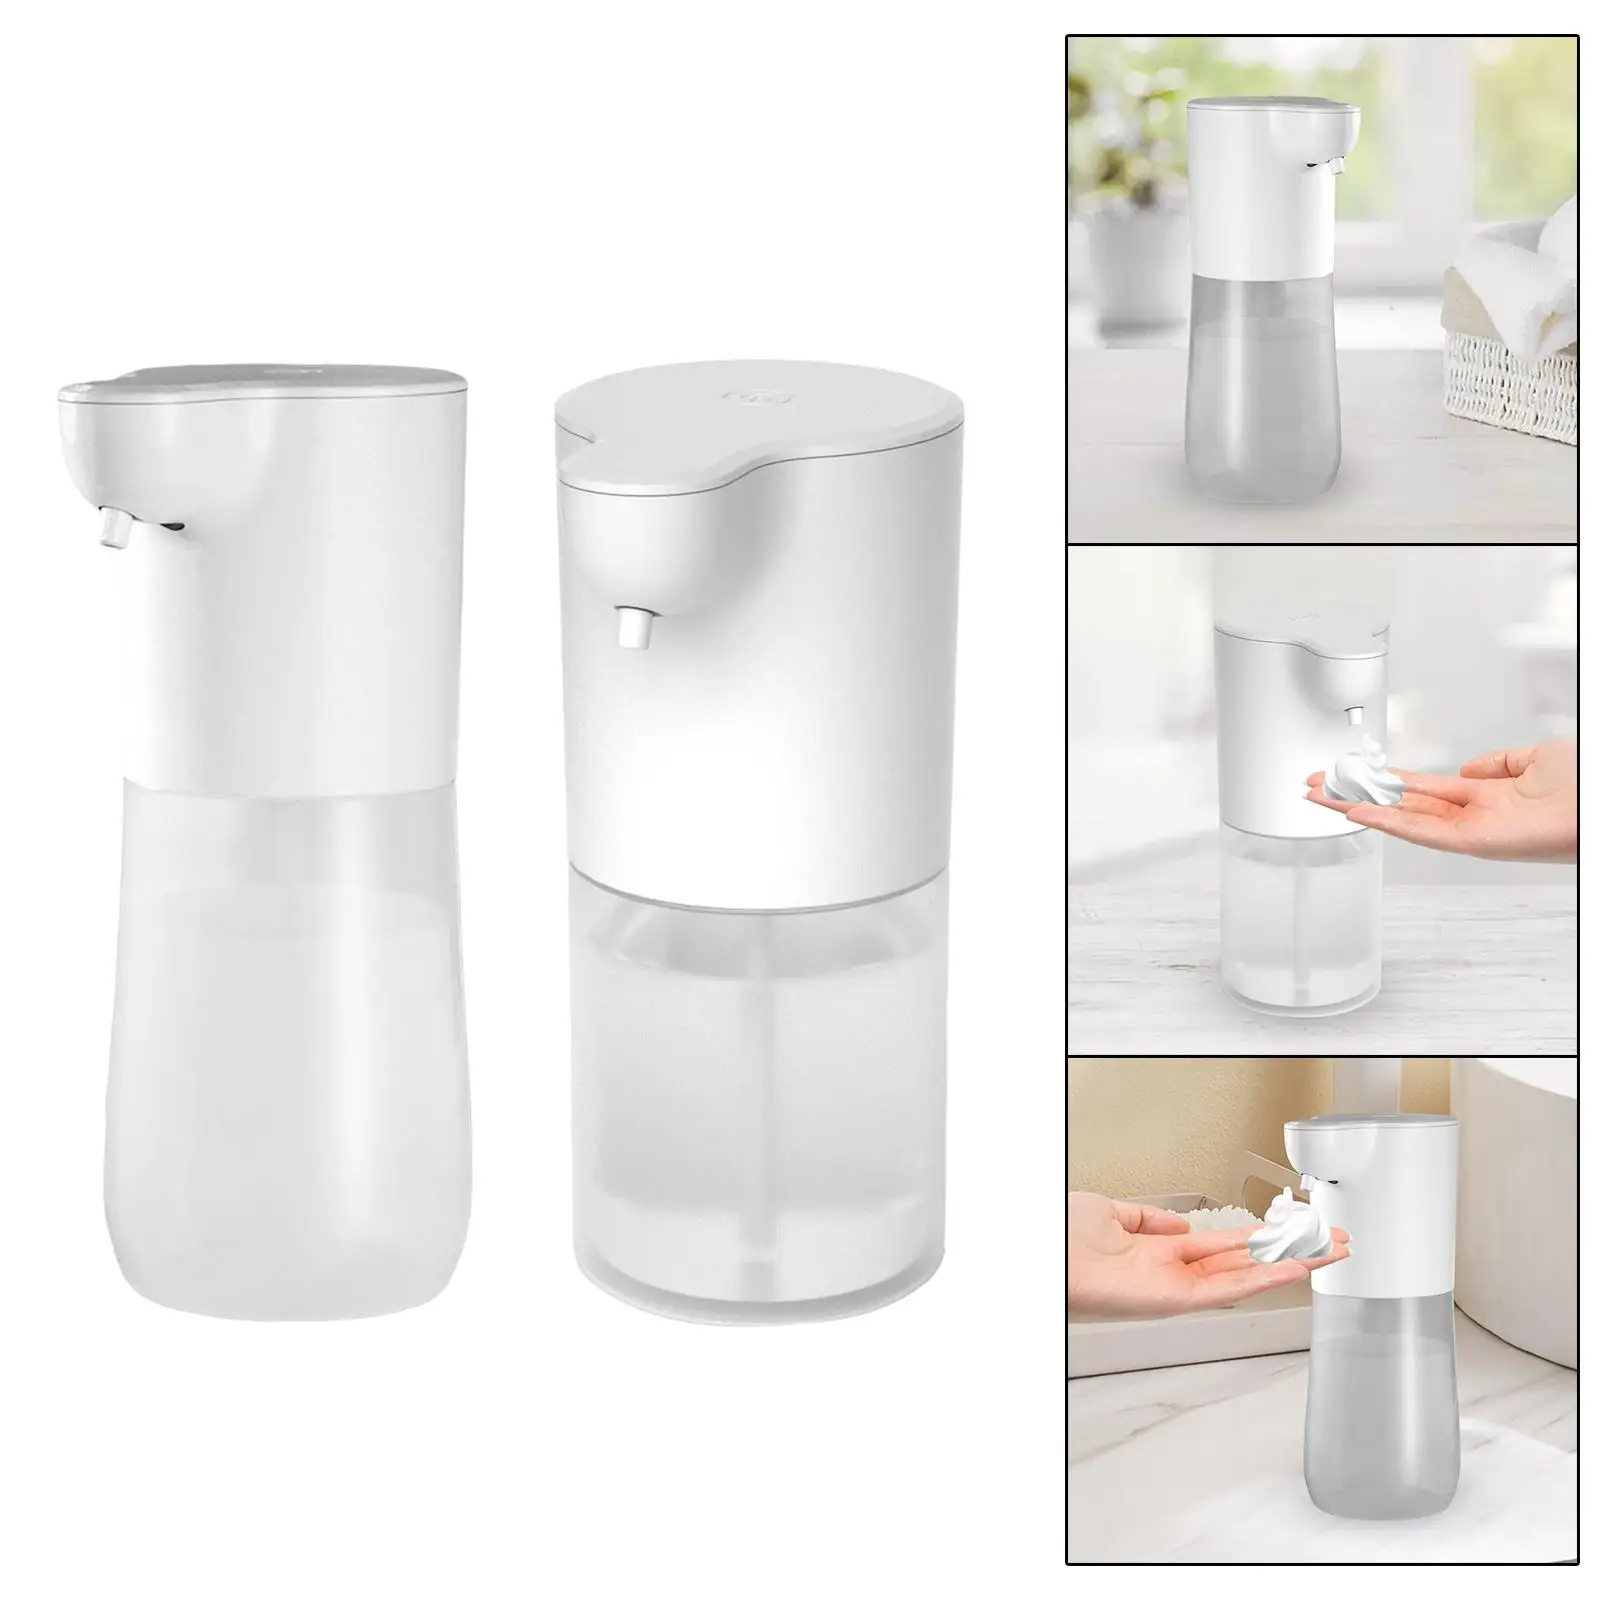 Fast Induction Automatic Liquid Soap Dispenser Hand Washing Machine Touchless Touchless Soap Dispensers for Kitchen Preschool